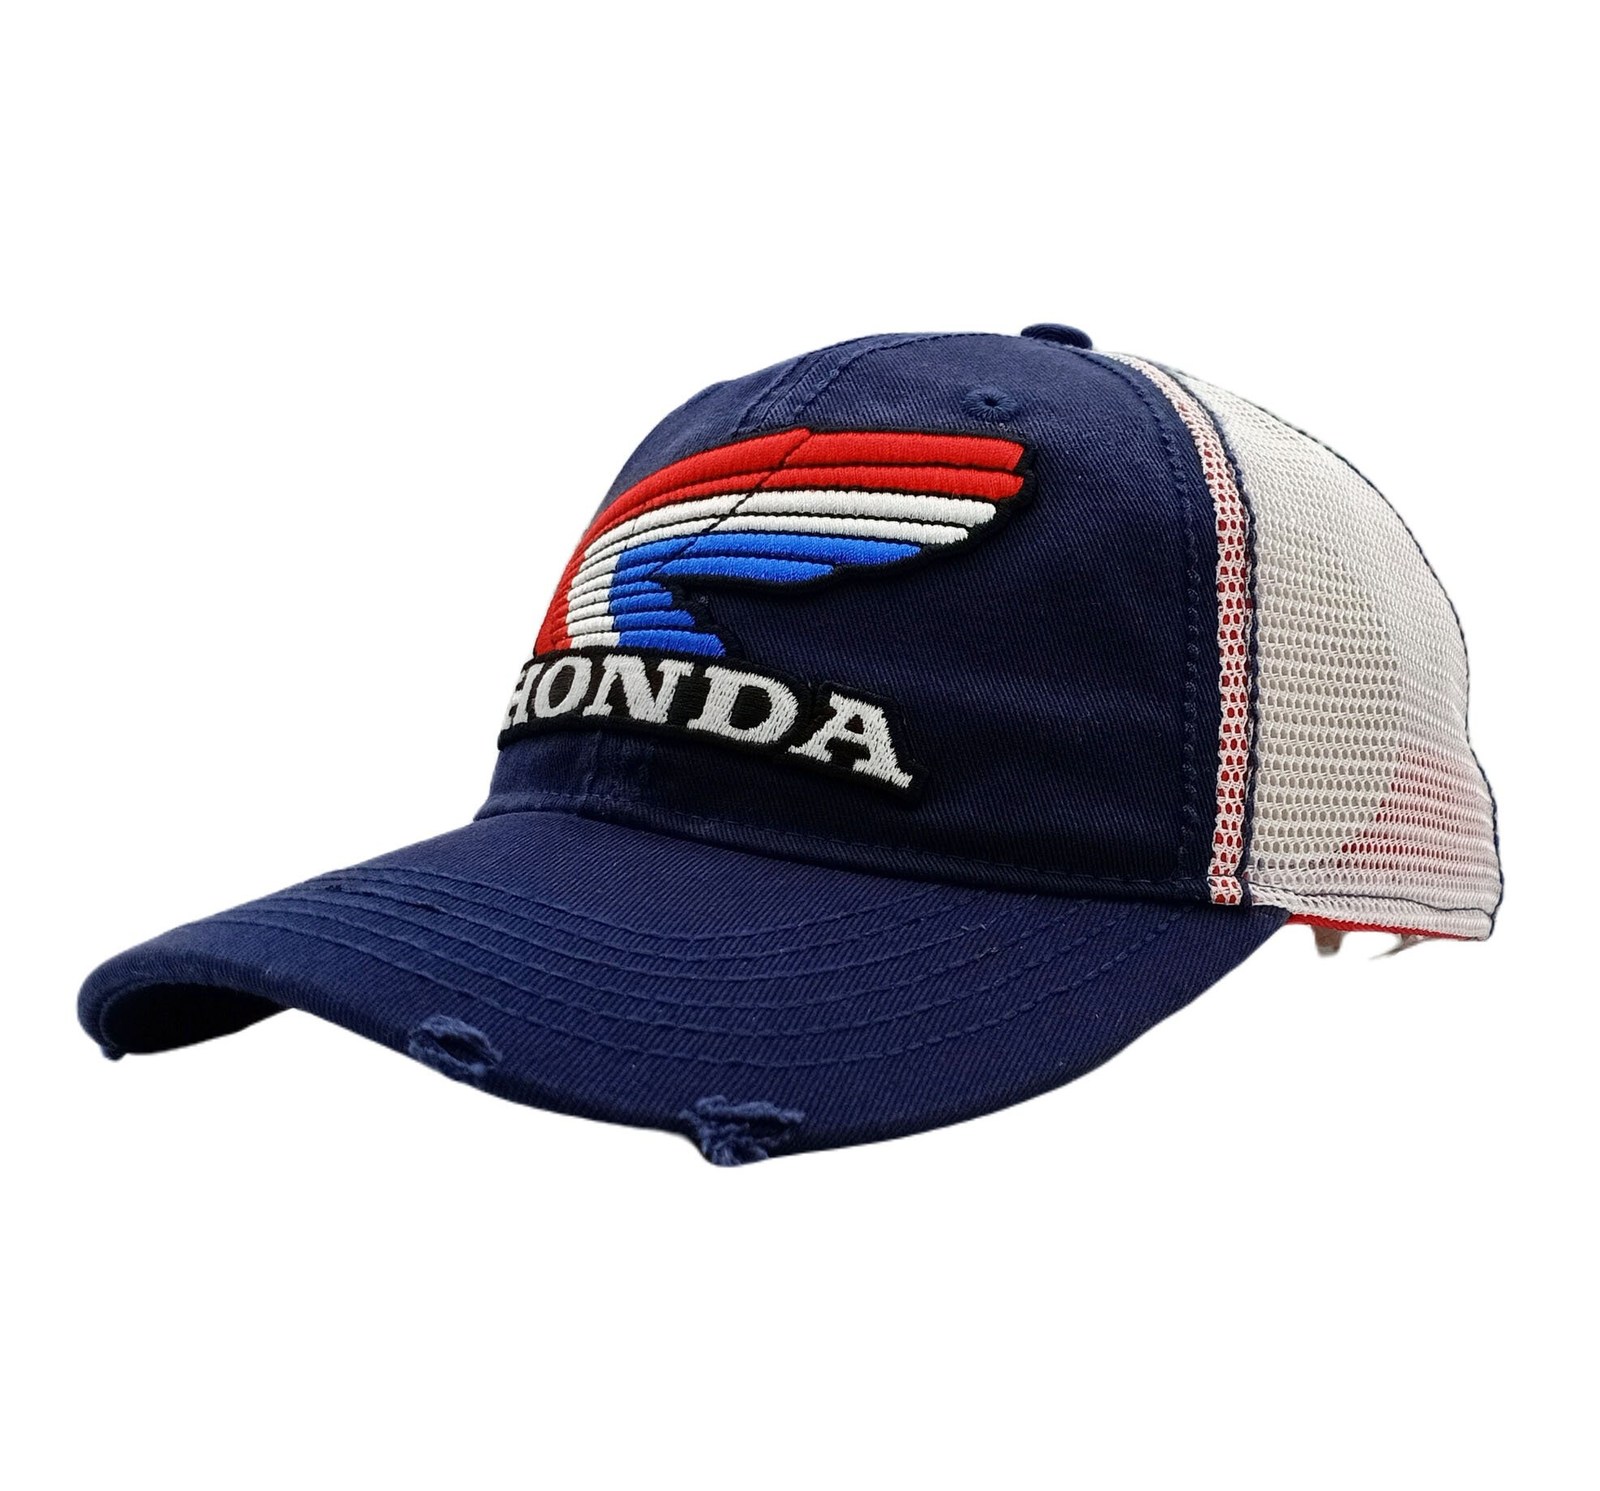 HONDA Cap Blue Snapback Distressed Tricolour Wing Breathable